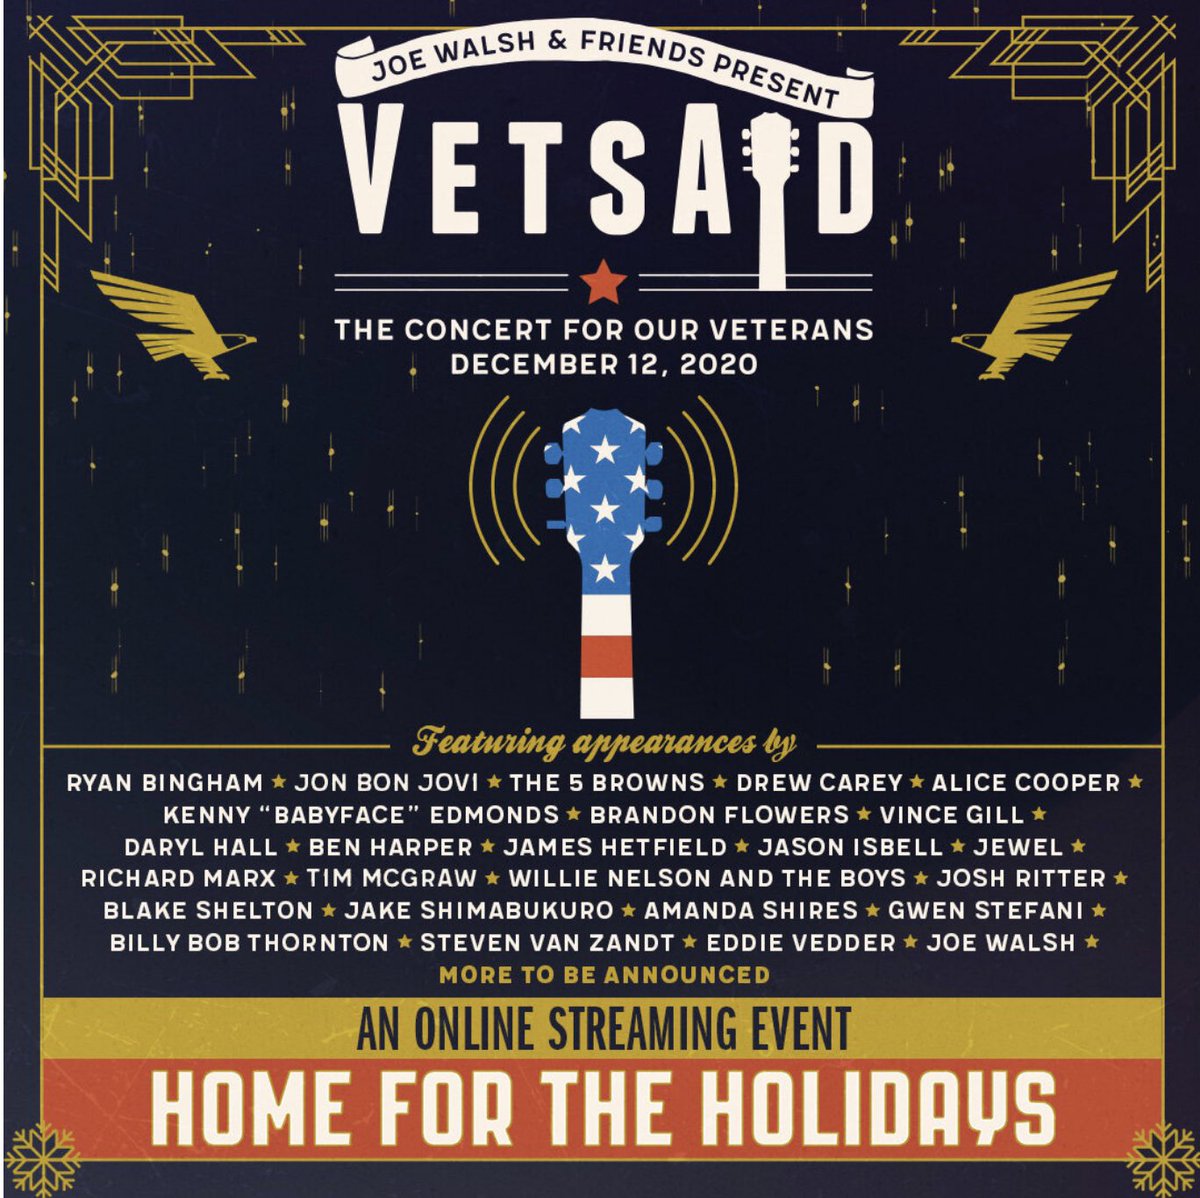 Looking forward to being part of this! Tickets go on sale on Wednesday, Nov 18 at 12pm EST. Make sure you tune in on Dec 12 for an evening of music and holiday cheer, supporting our veterans!